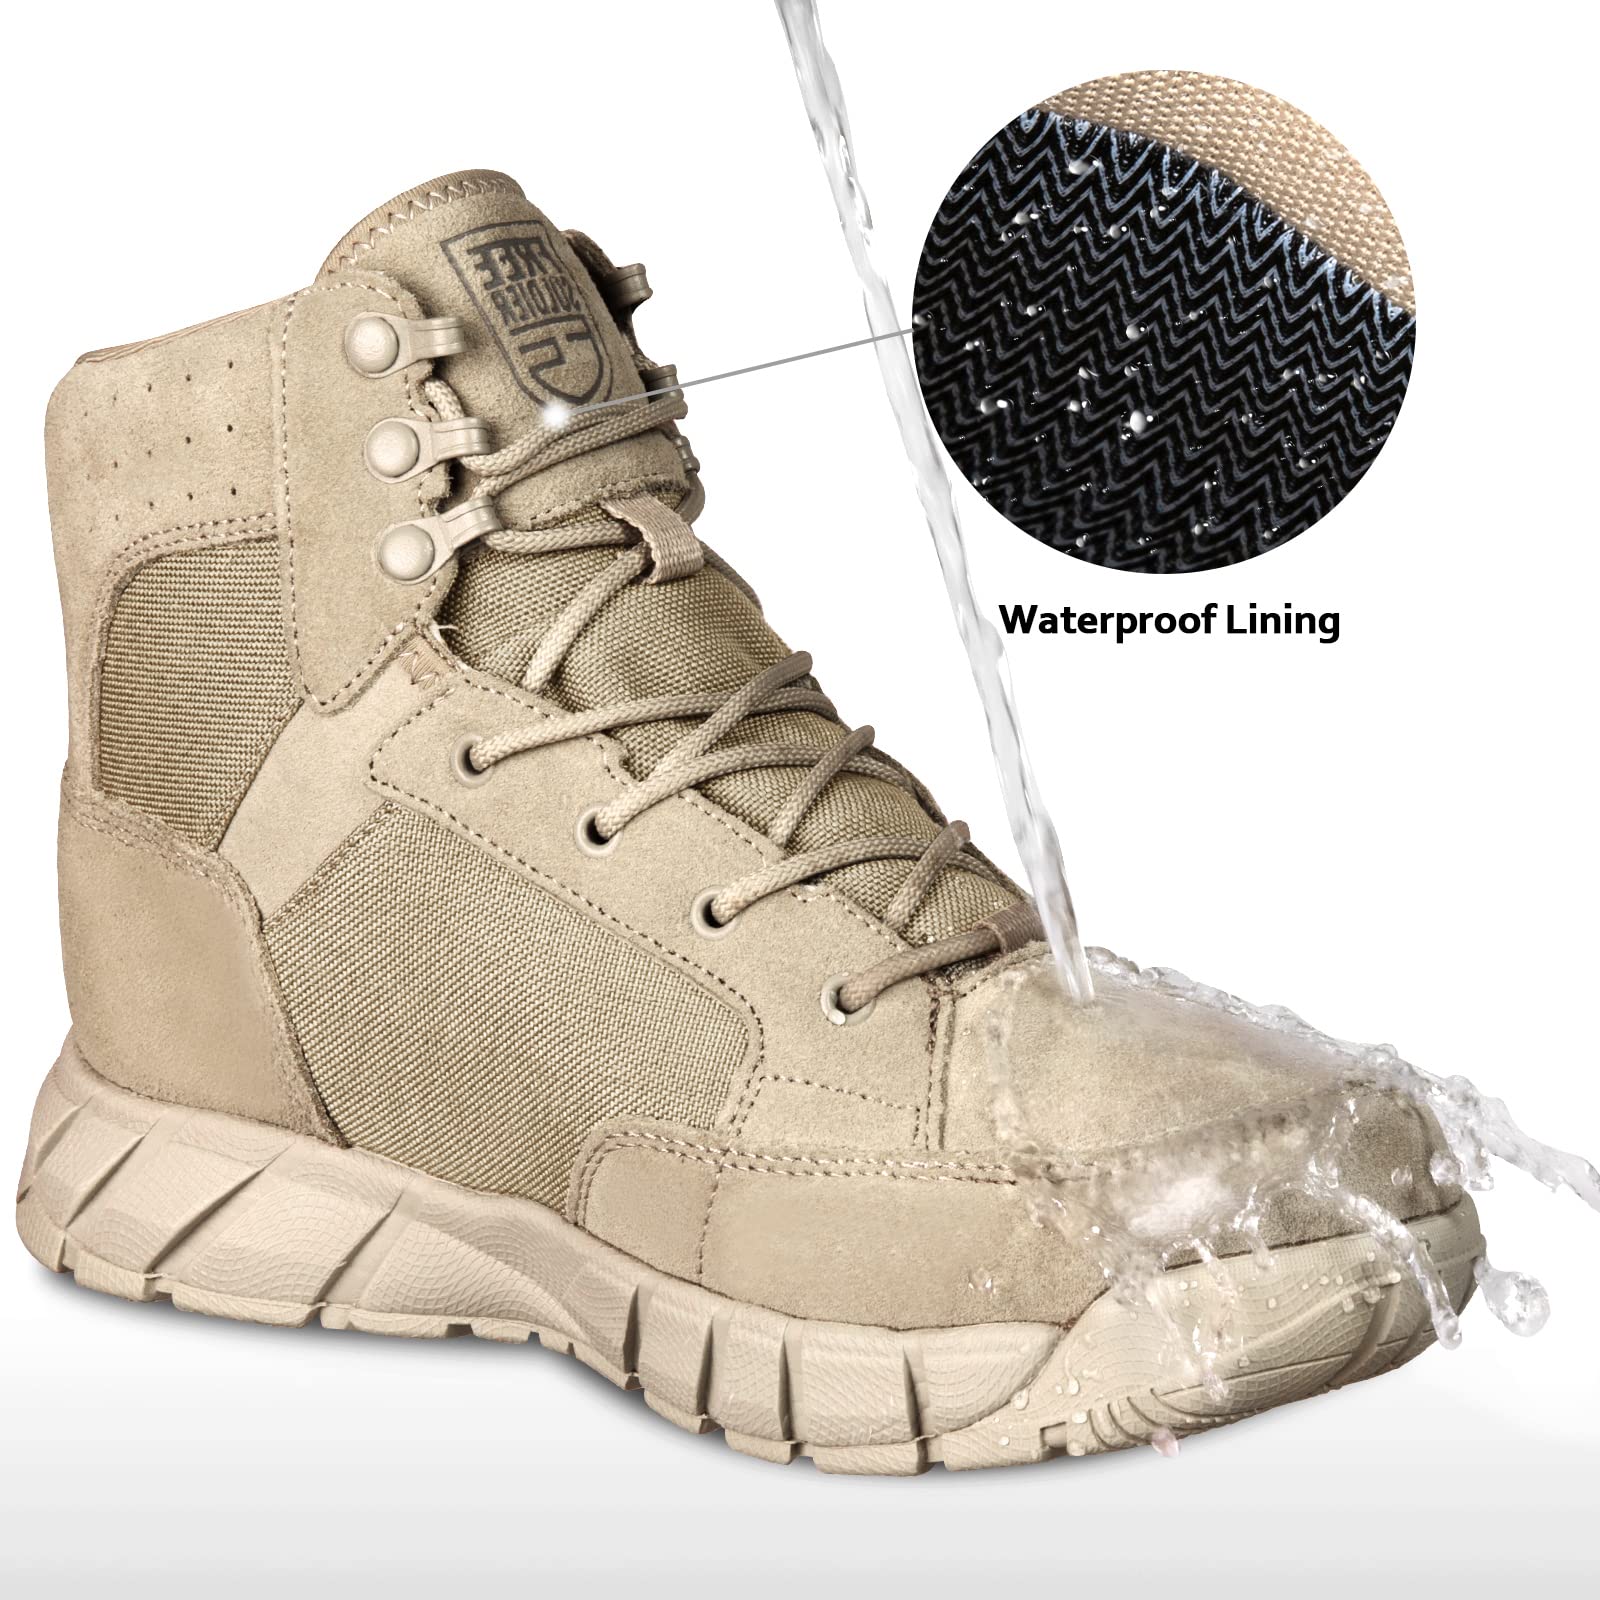 FREE SOLDIER Waterproof Hiking Work Boots Men's Tactical Boots 6 Inches Lightweight Military Boots Breathable Desert Boots